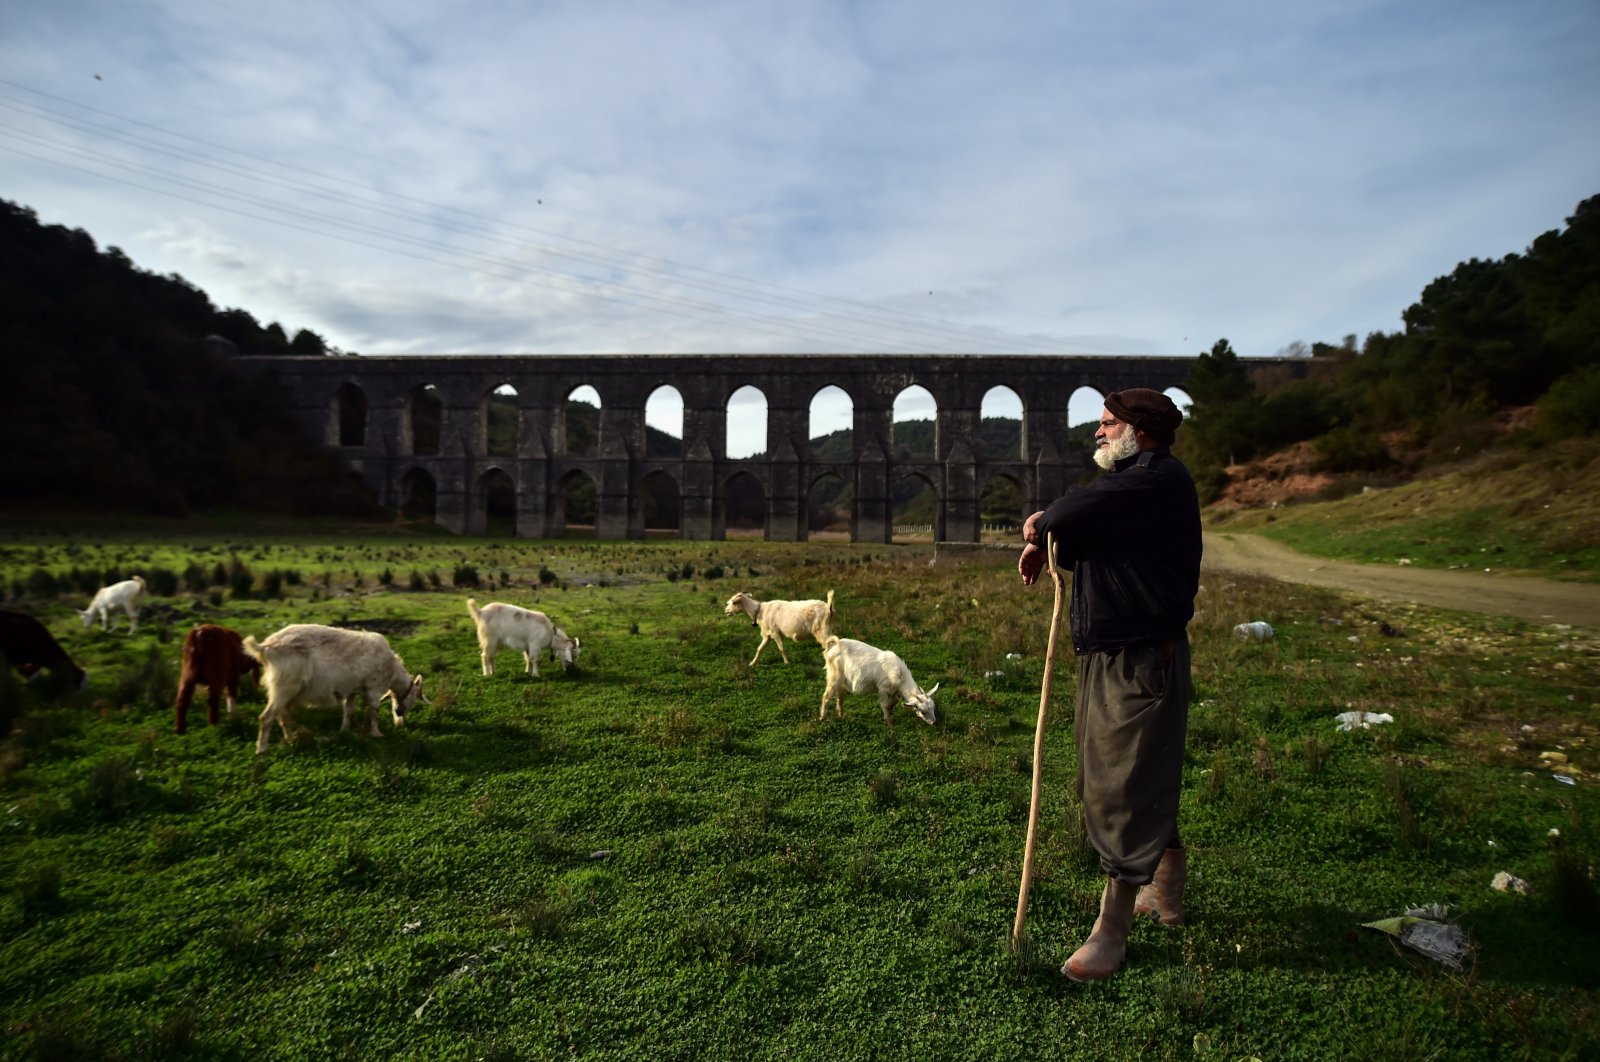 A shepherd tends to his herd as the sheep and goats graze in Alibeyköy Dam's now empty water reservoir, in Istanbul, Turkey, Jan. 8, 2021. (IHA Photo)